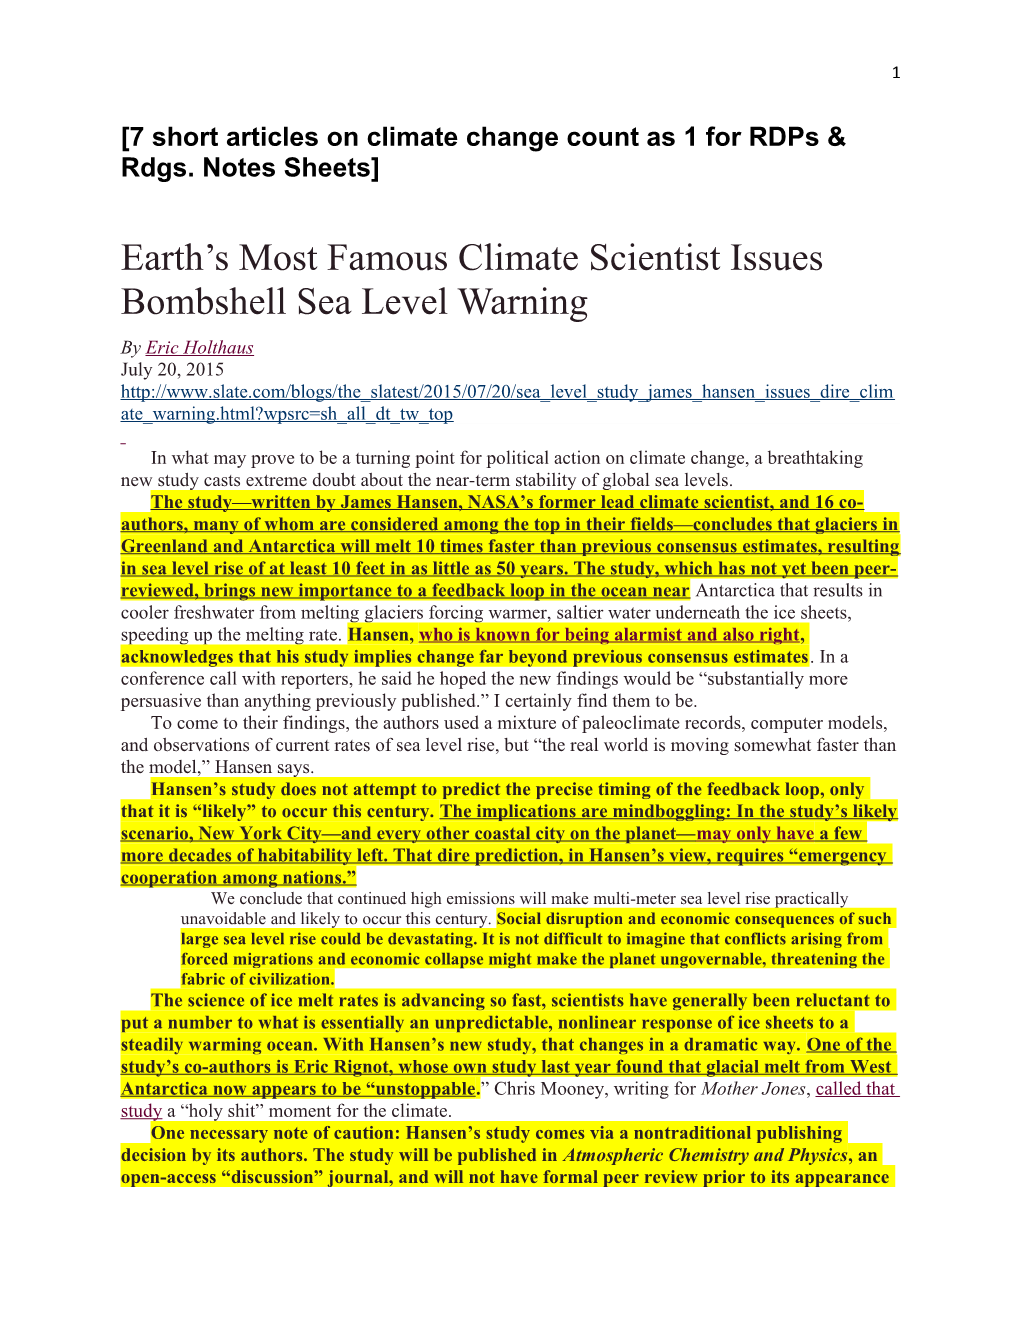 7 Short Articles on Climate Change Count As 1 for Rdps & Rdgs. Notes Sheets